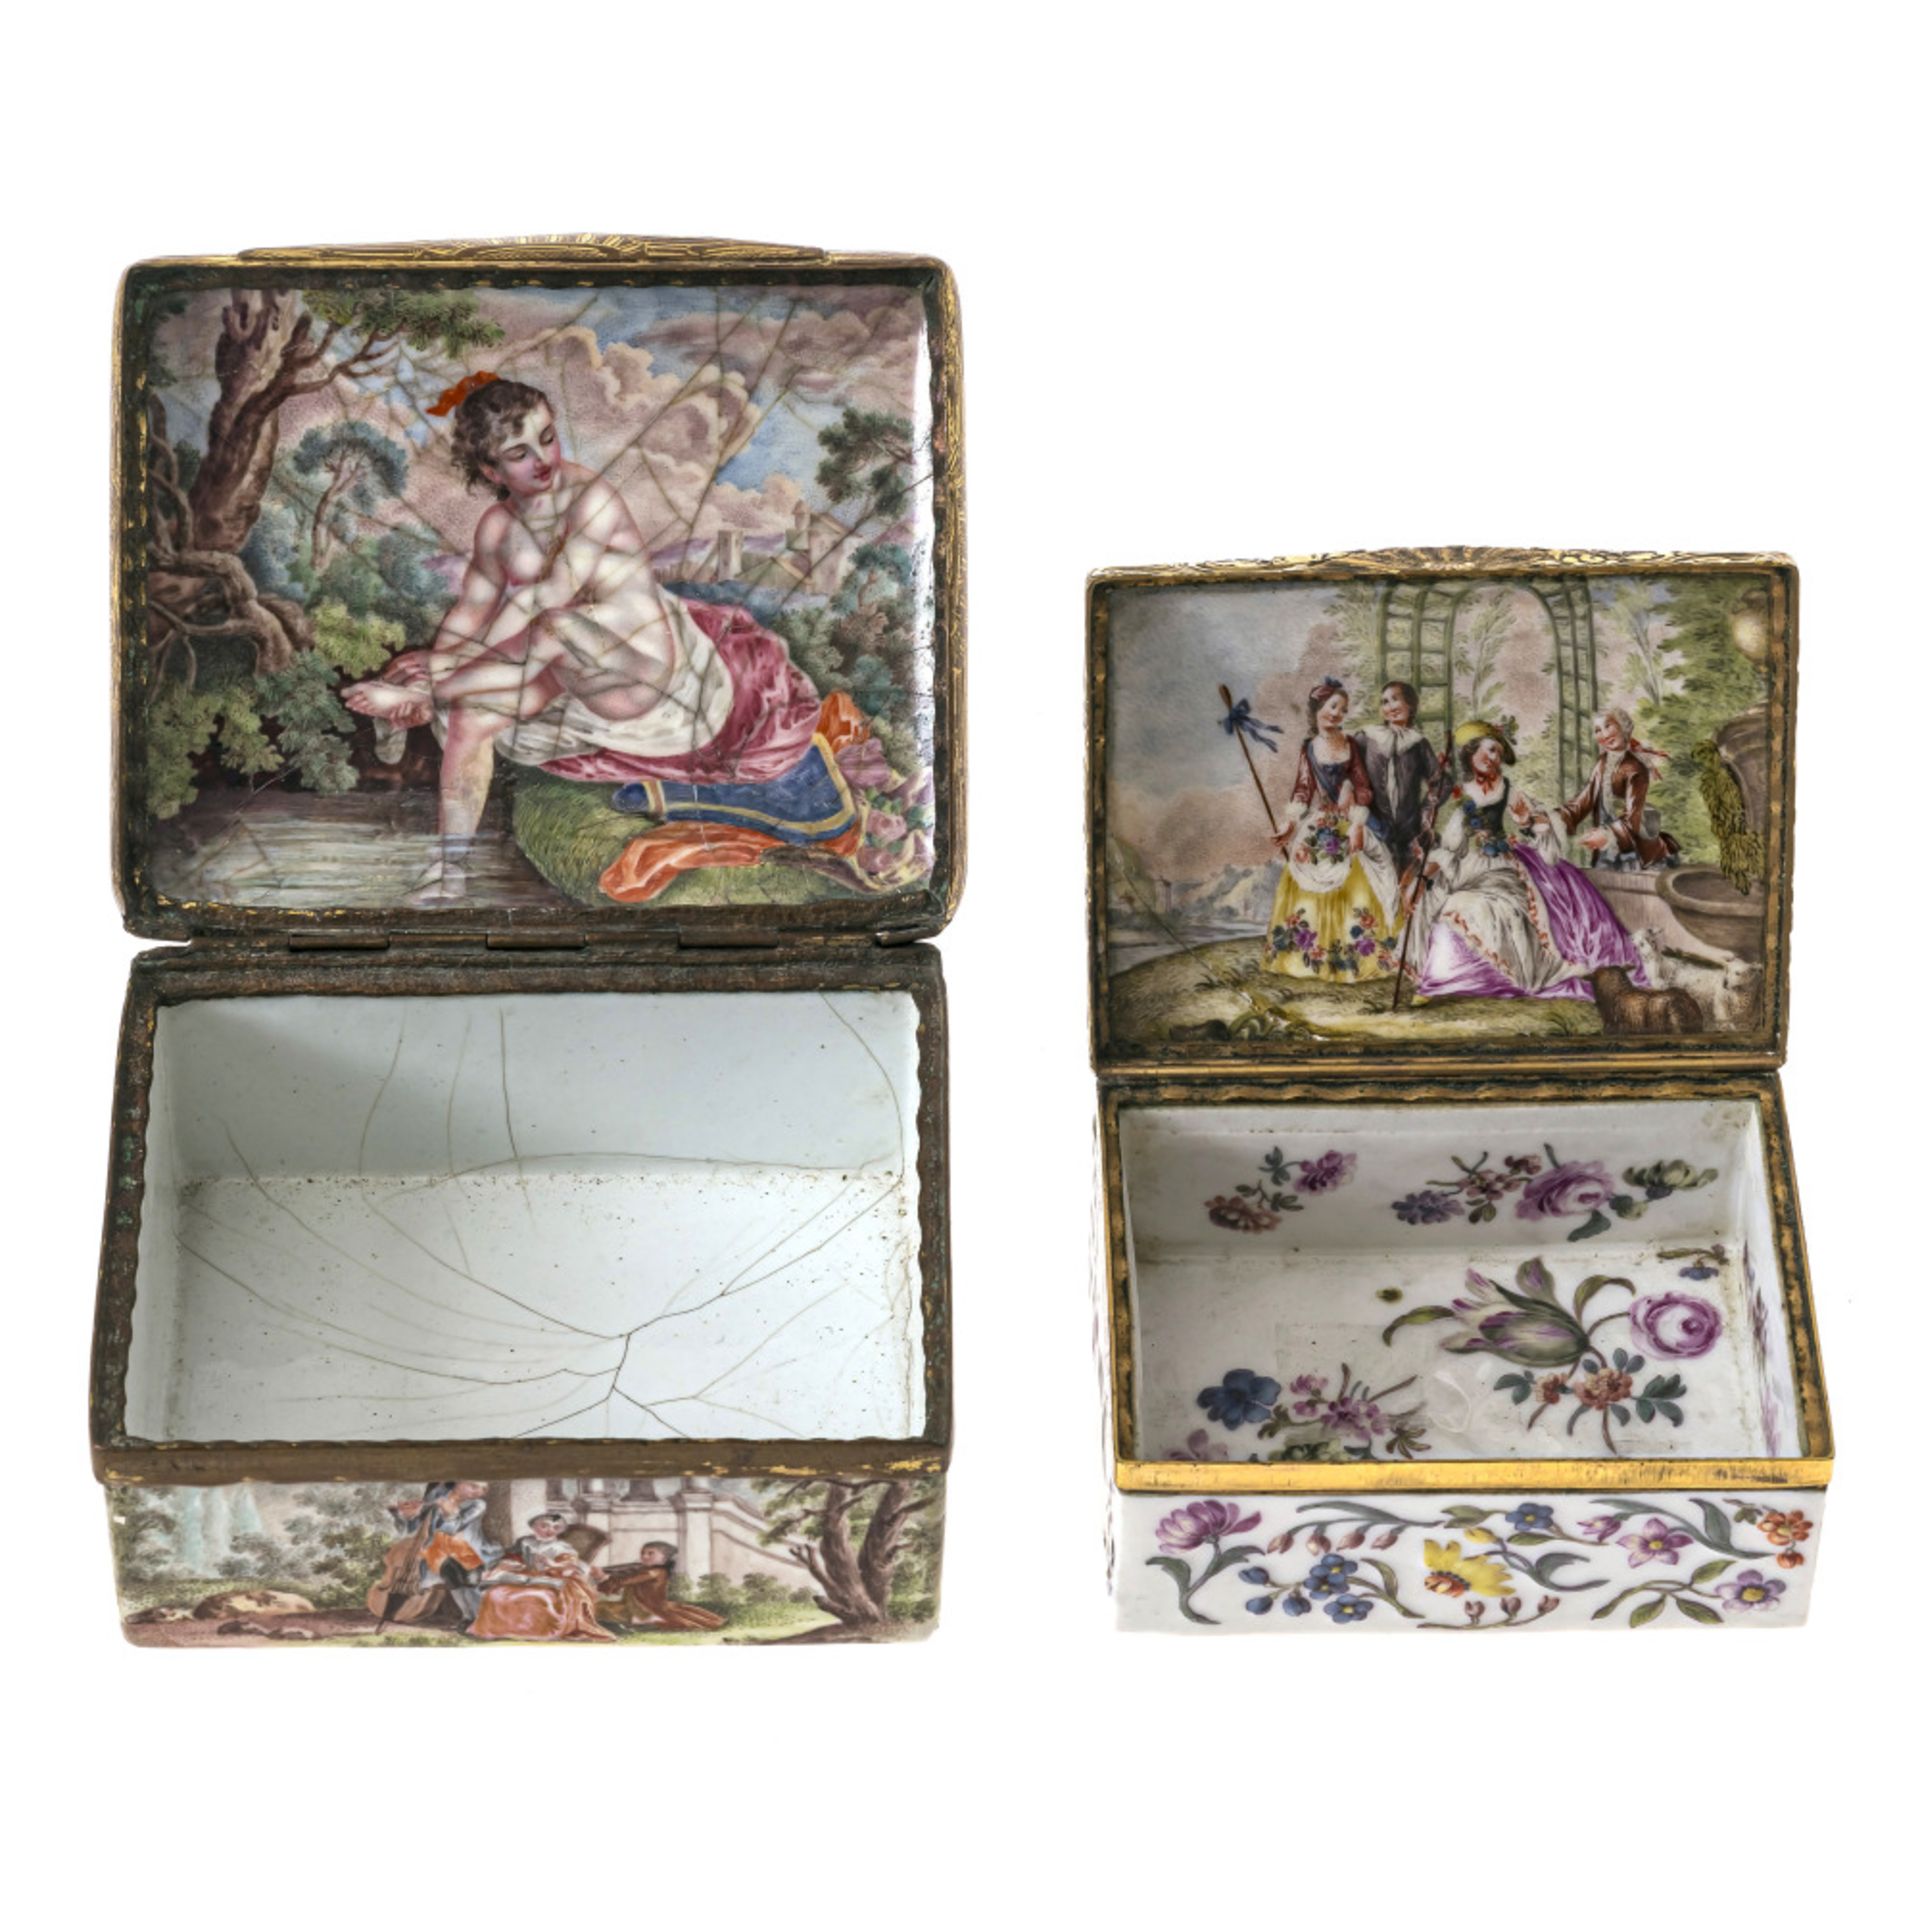 Two snuff boxes - 18th century - Image 2 of 3